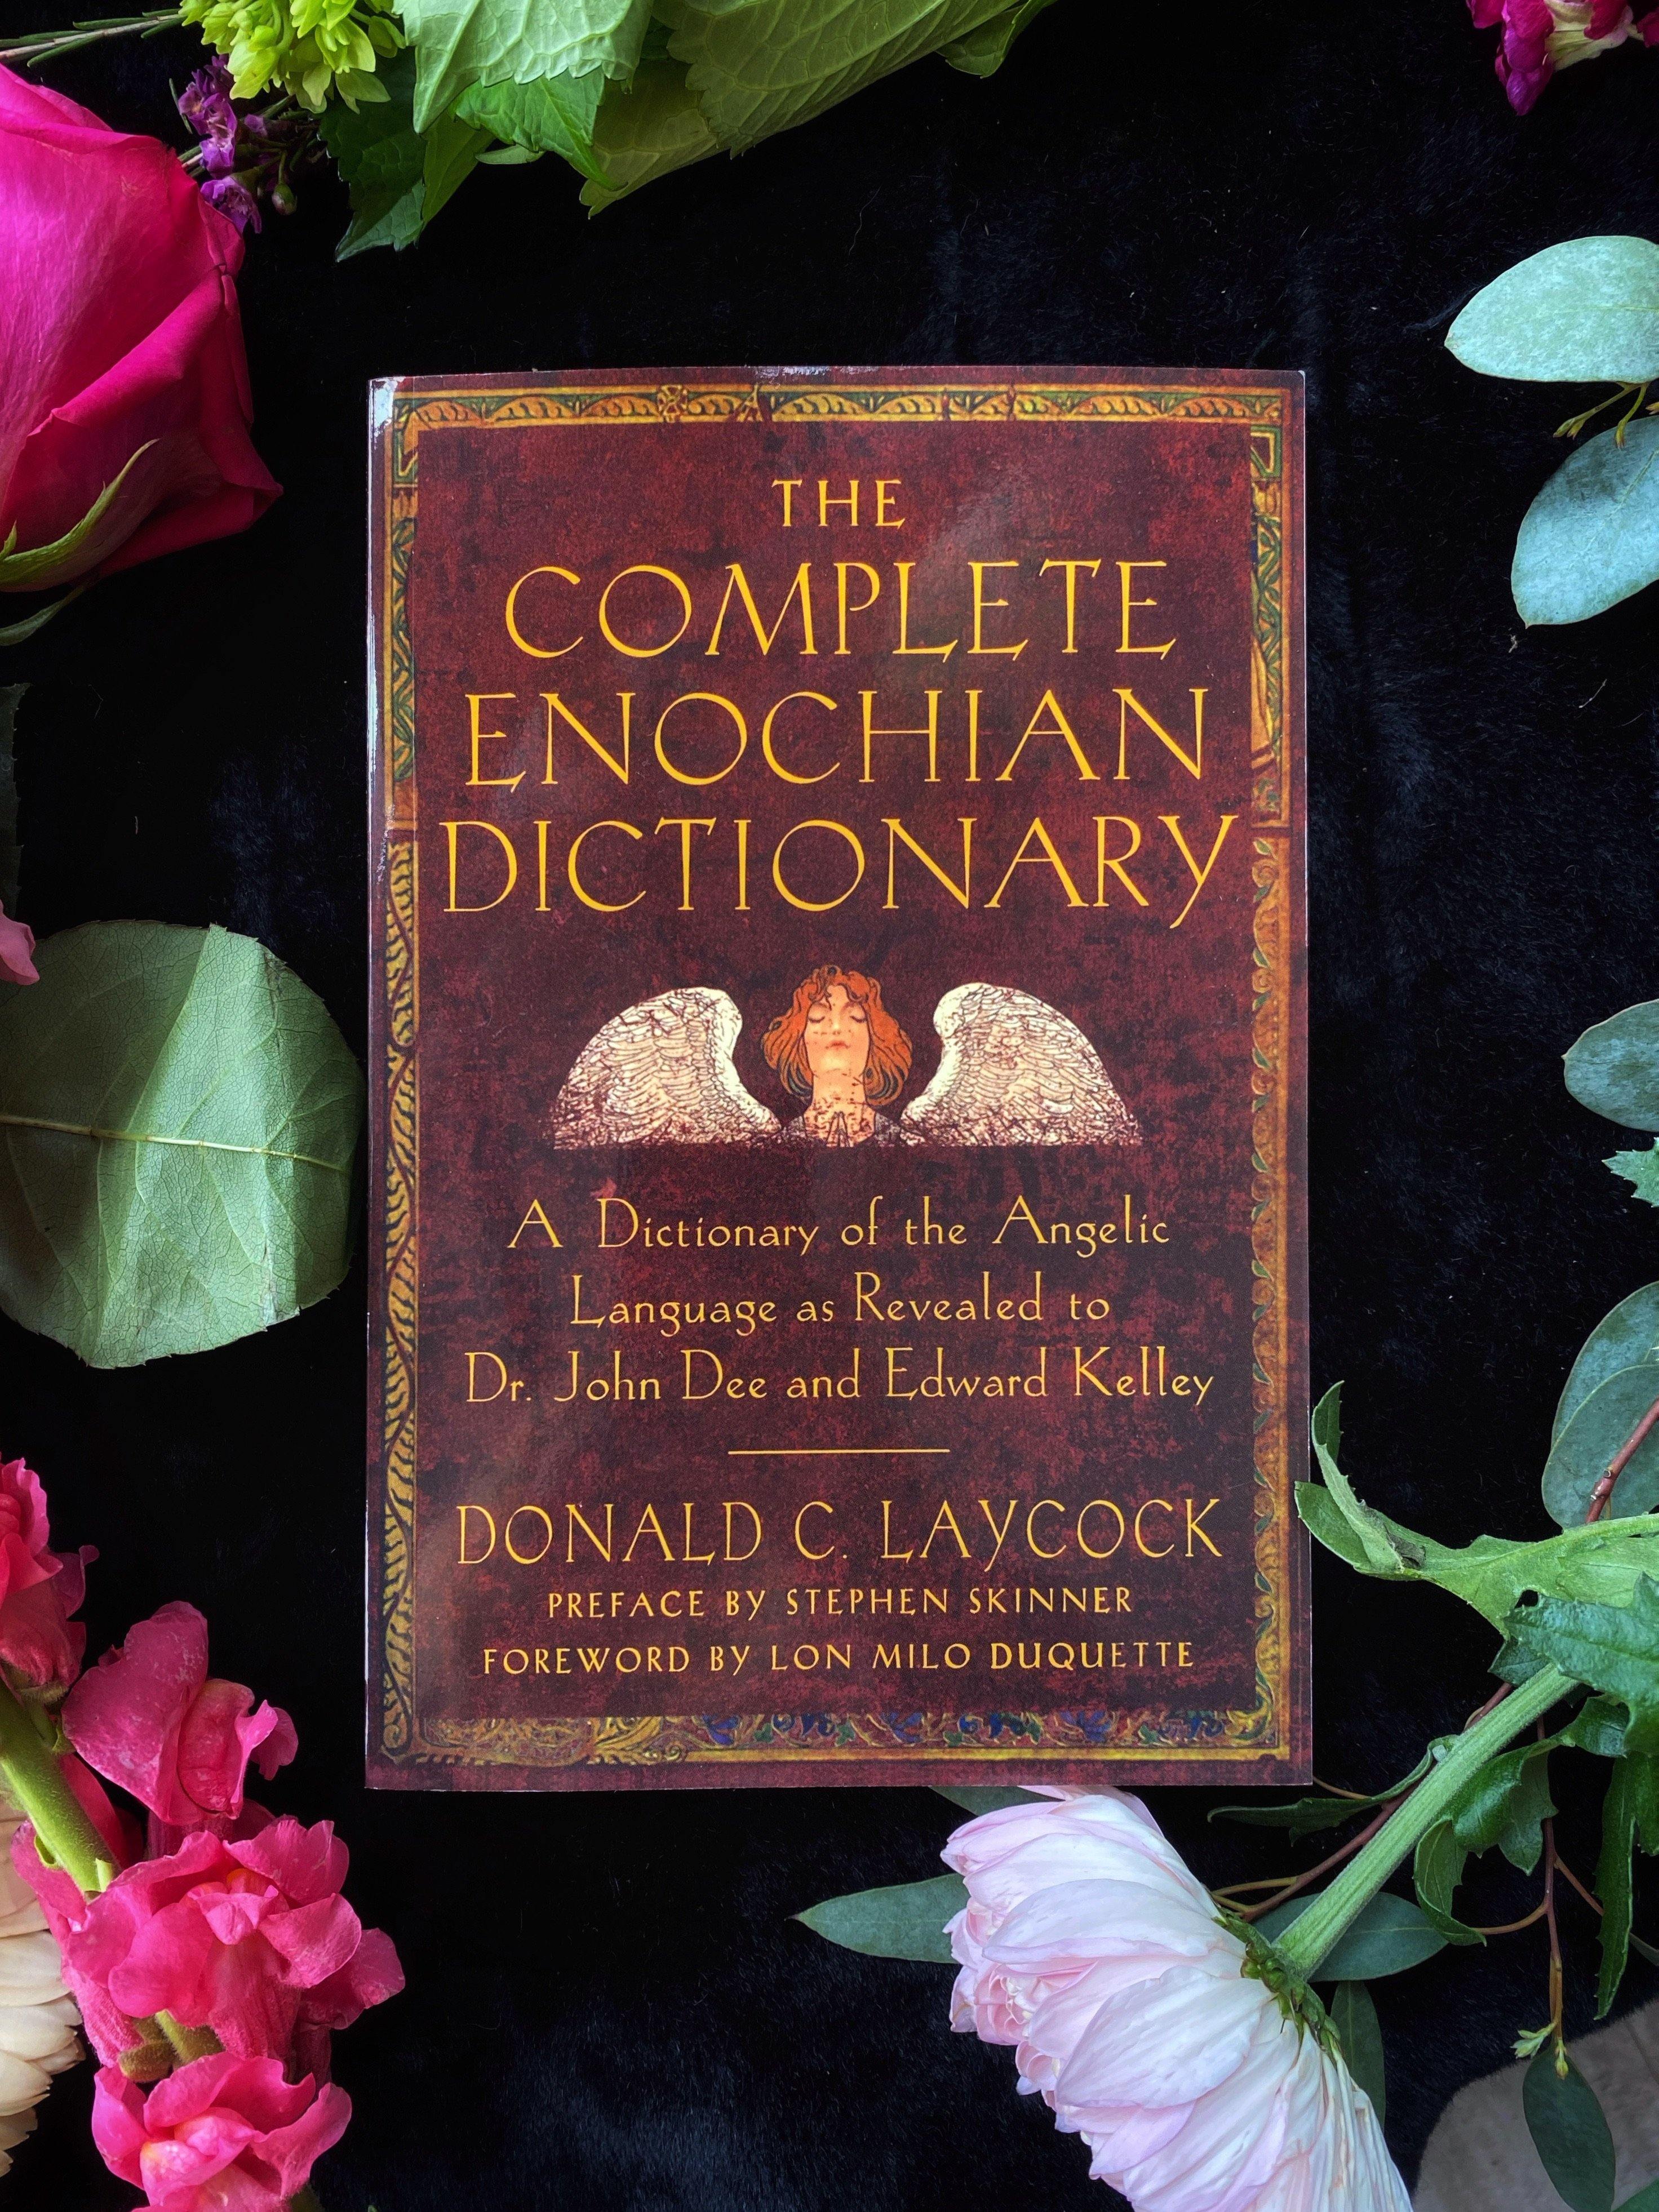 The Complete Enochian Dictionary : A Dictionary of the Angelic Language as Revealed to Dr. John Dee and Edward kelley - qmeb